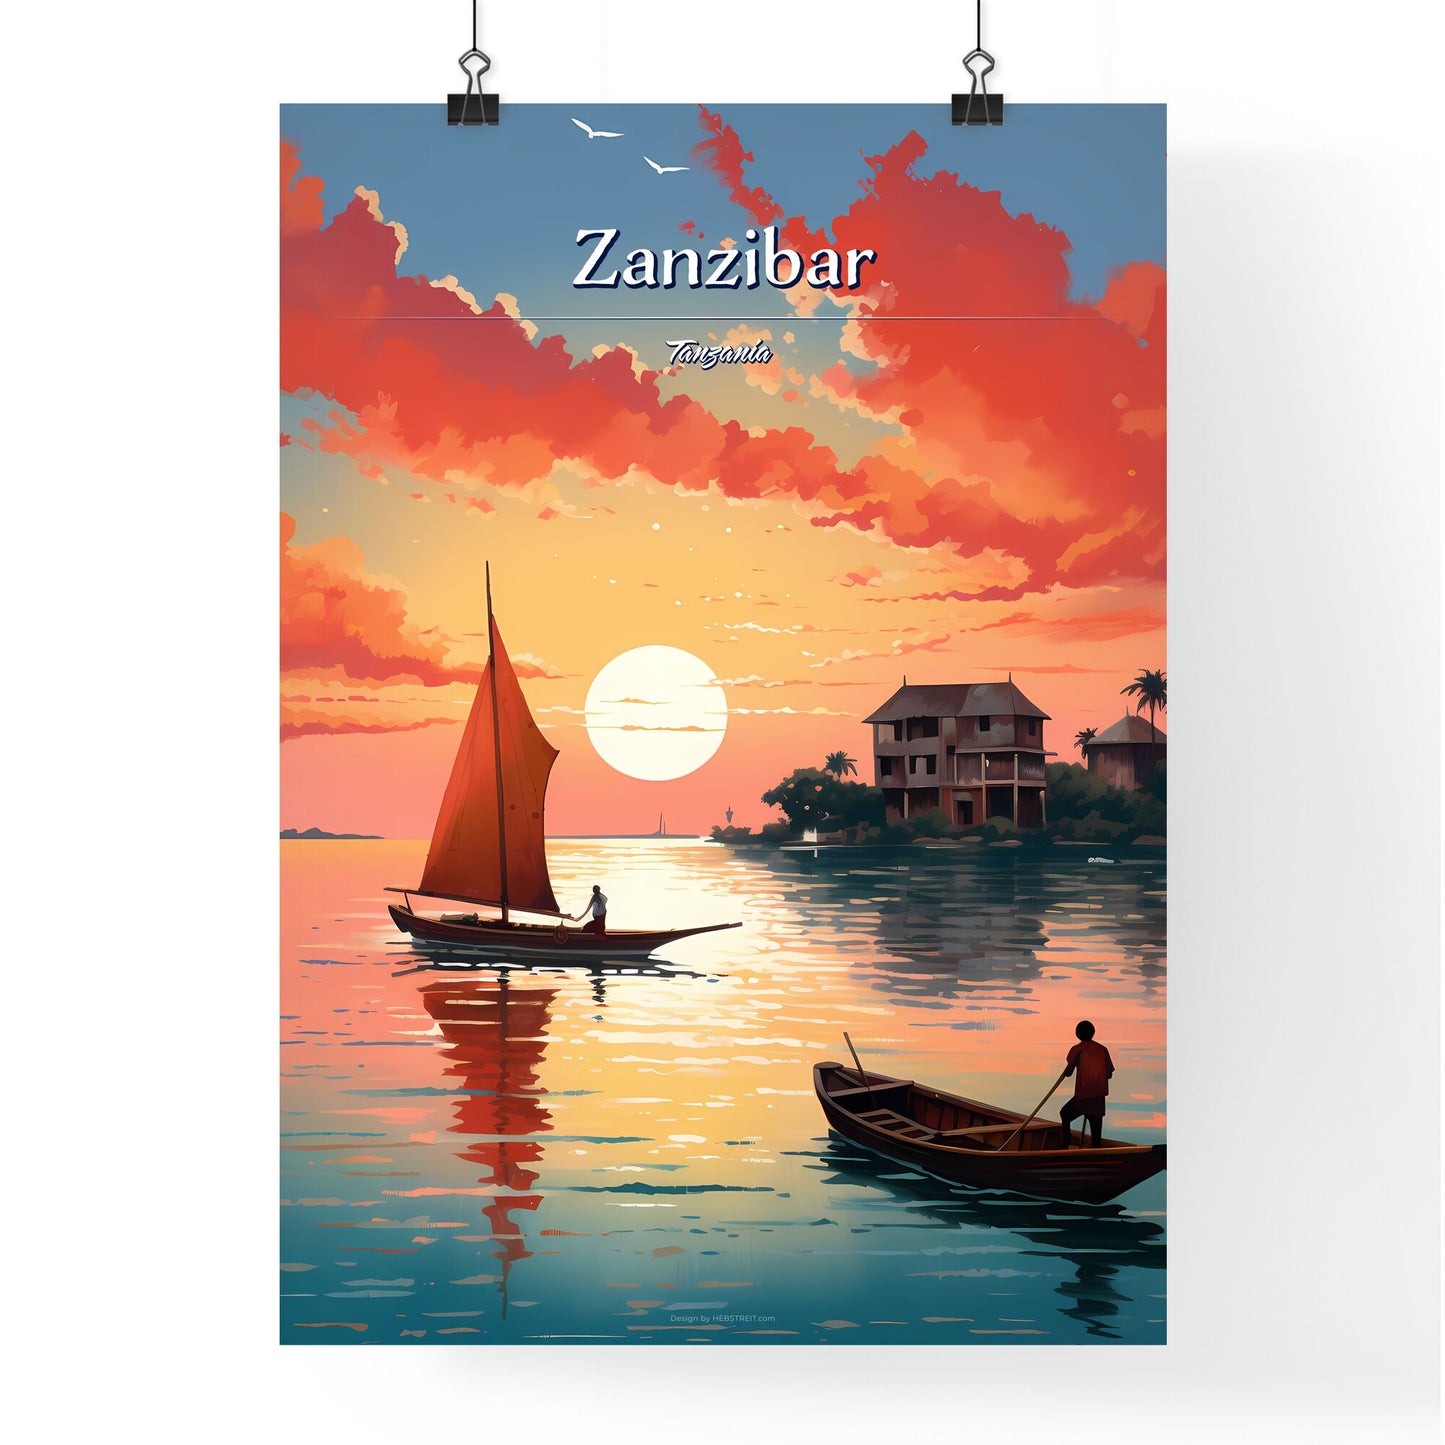 Zanzibar, Tanzania - Art print of a couple of boats on a lake with a house in the background Default Title